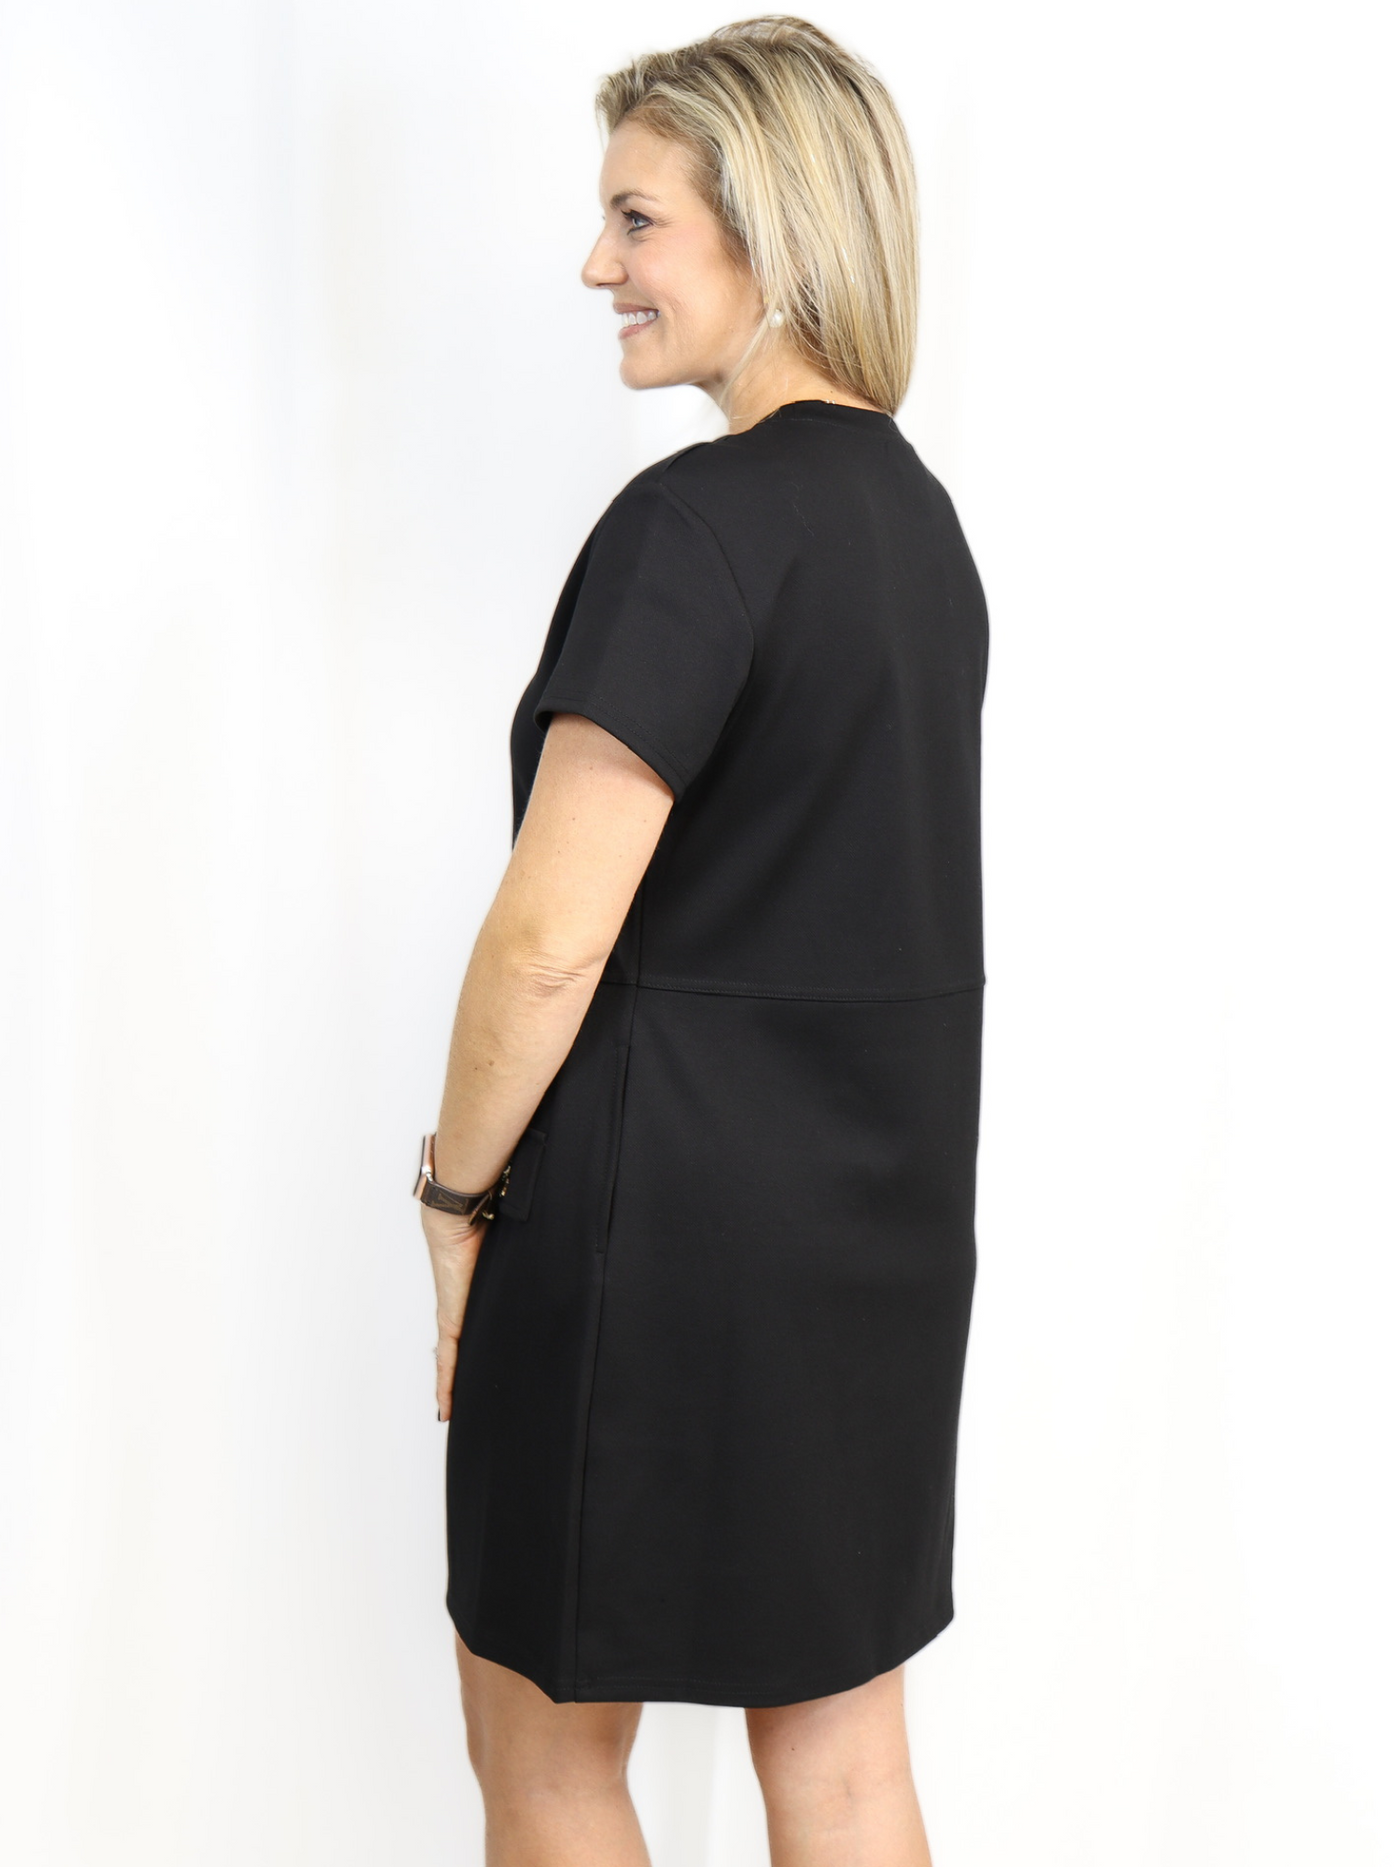 Black Shift Dress with Gold Buttons back view.